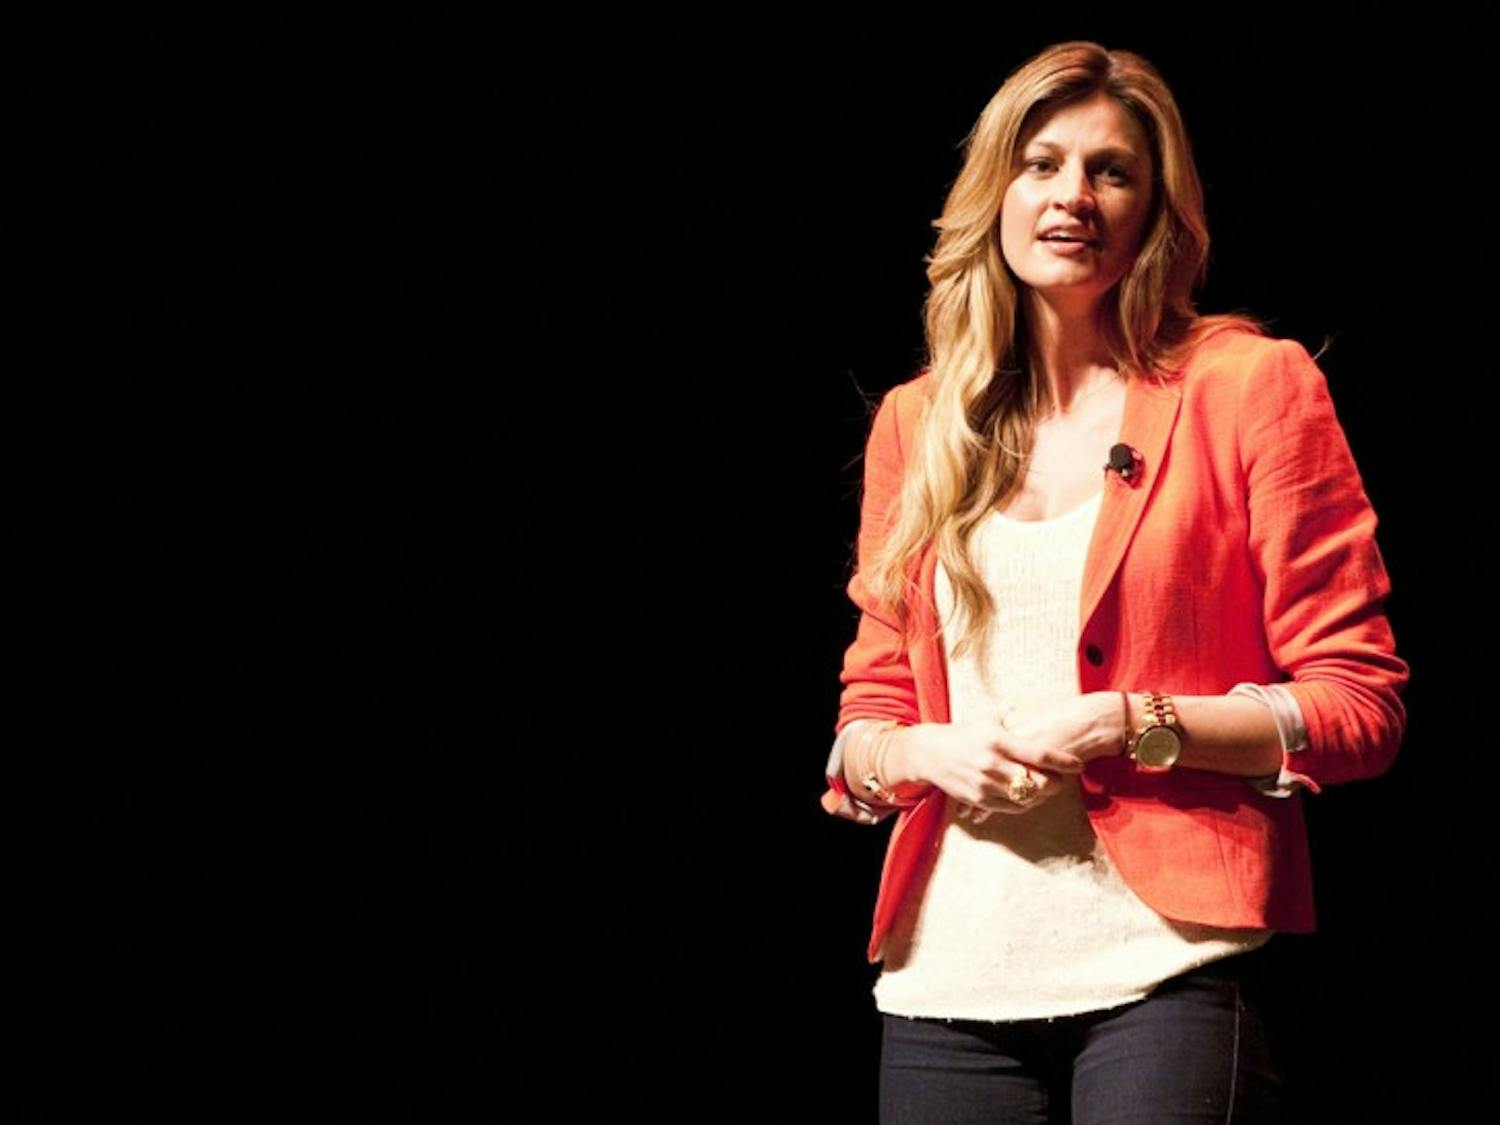 Erin Andrews speaks at the Phillips Center for the Performing Arts on Wednesday night.